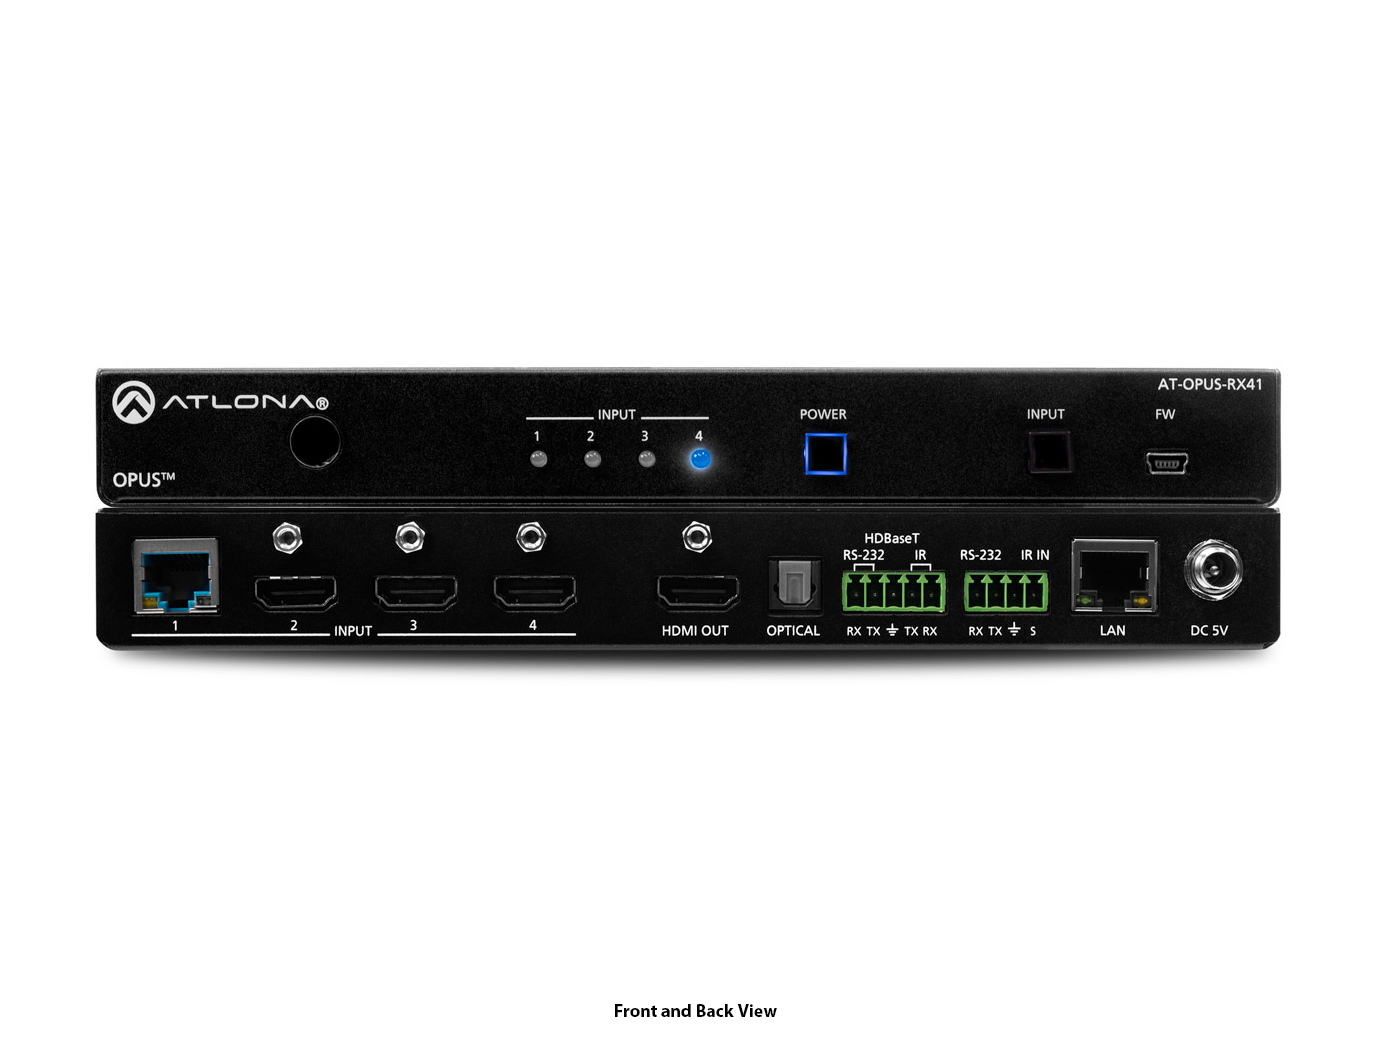 AT-OPUS-RX41 Four-Input 4K HDR Switcher with HDMI and HDBaseT Inputs by Atlona